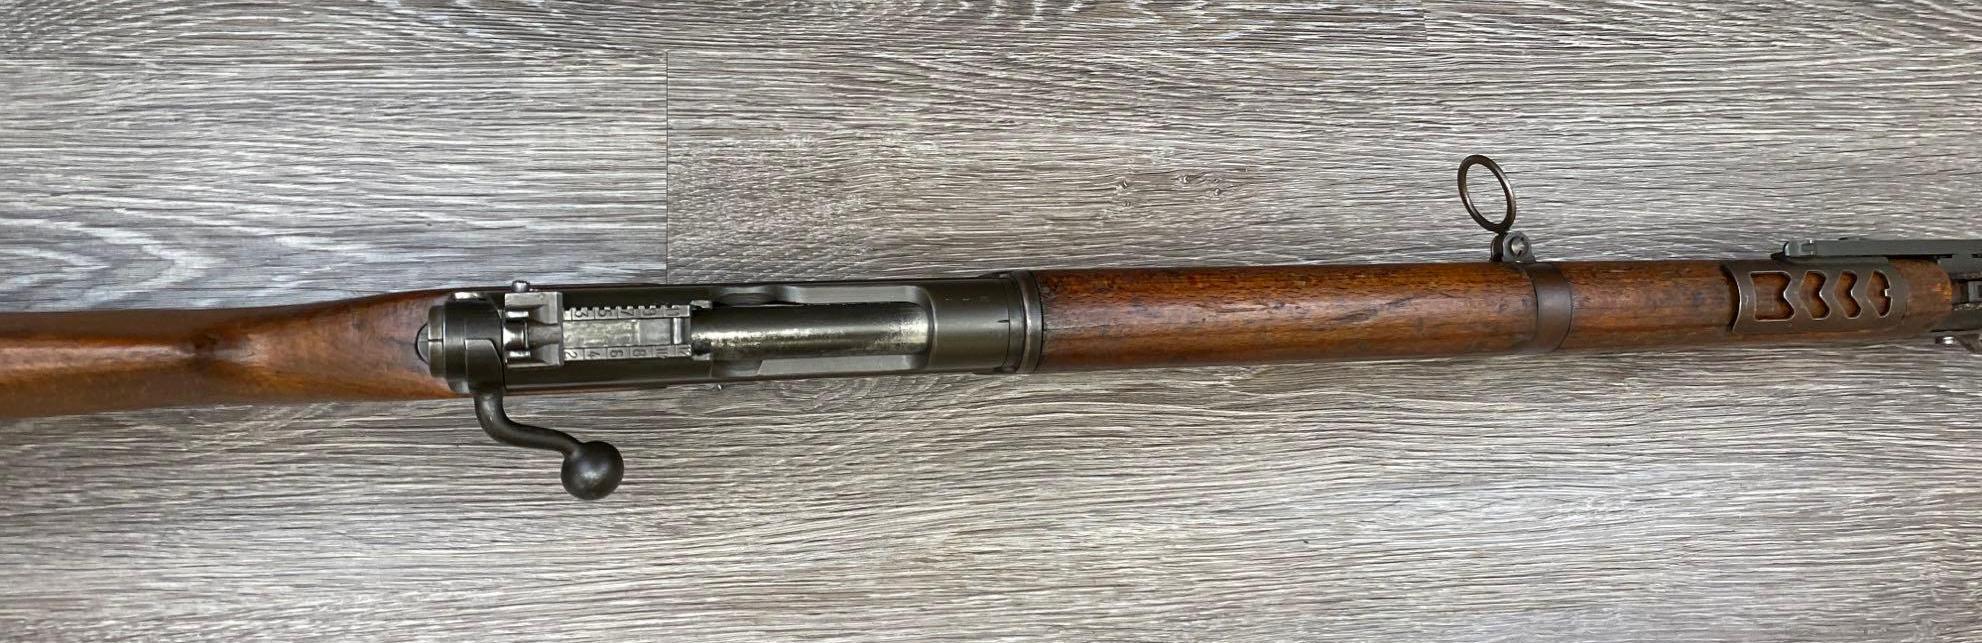 FRENCH MAS MODEL 1936-51 7.5x54mm BOLT-ACTION MILITARY RIFLE